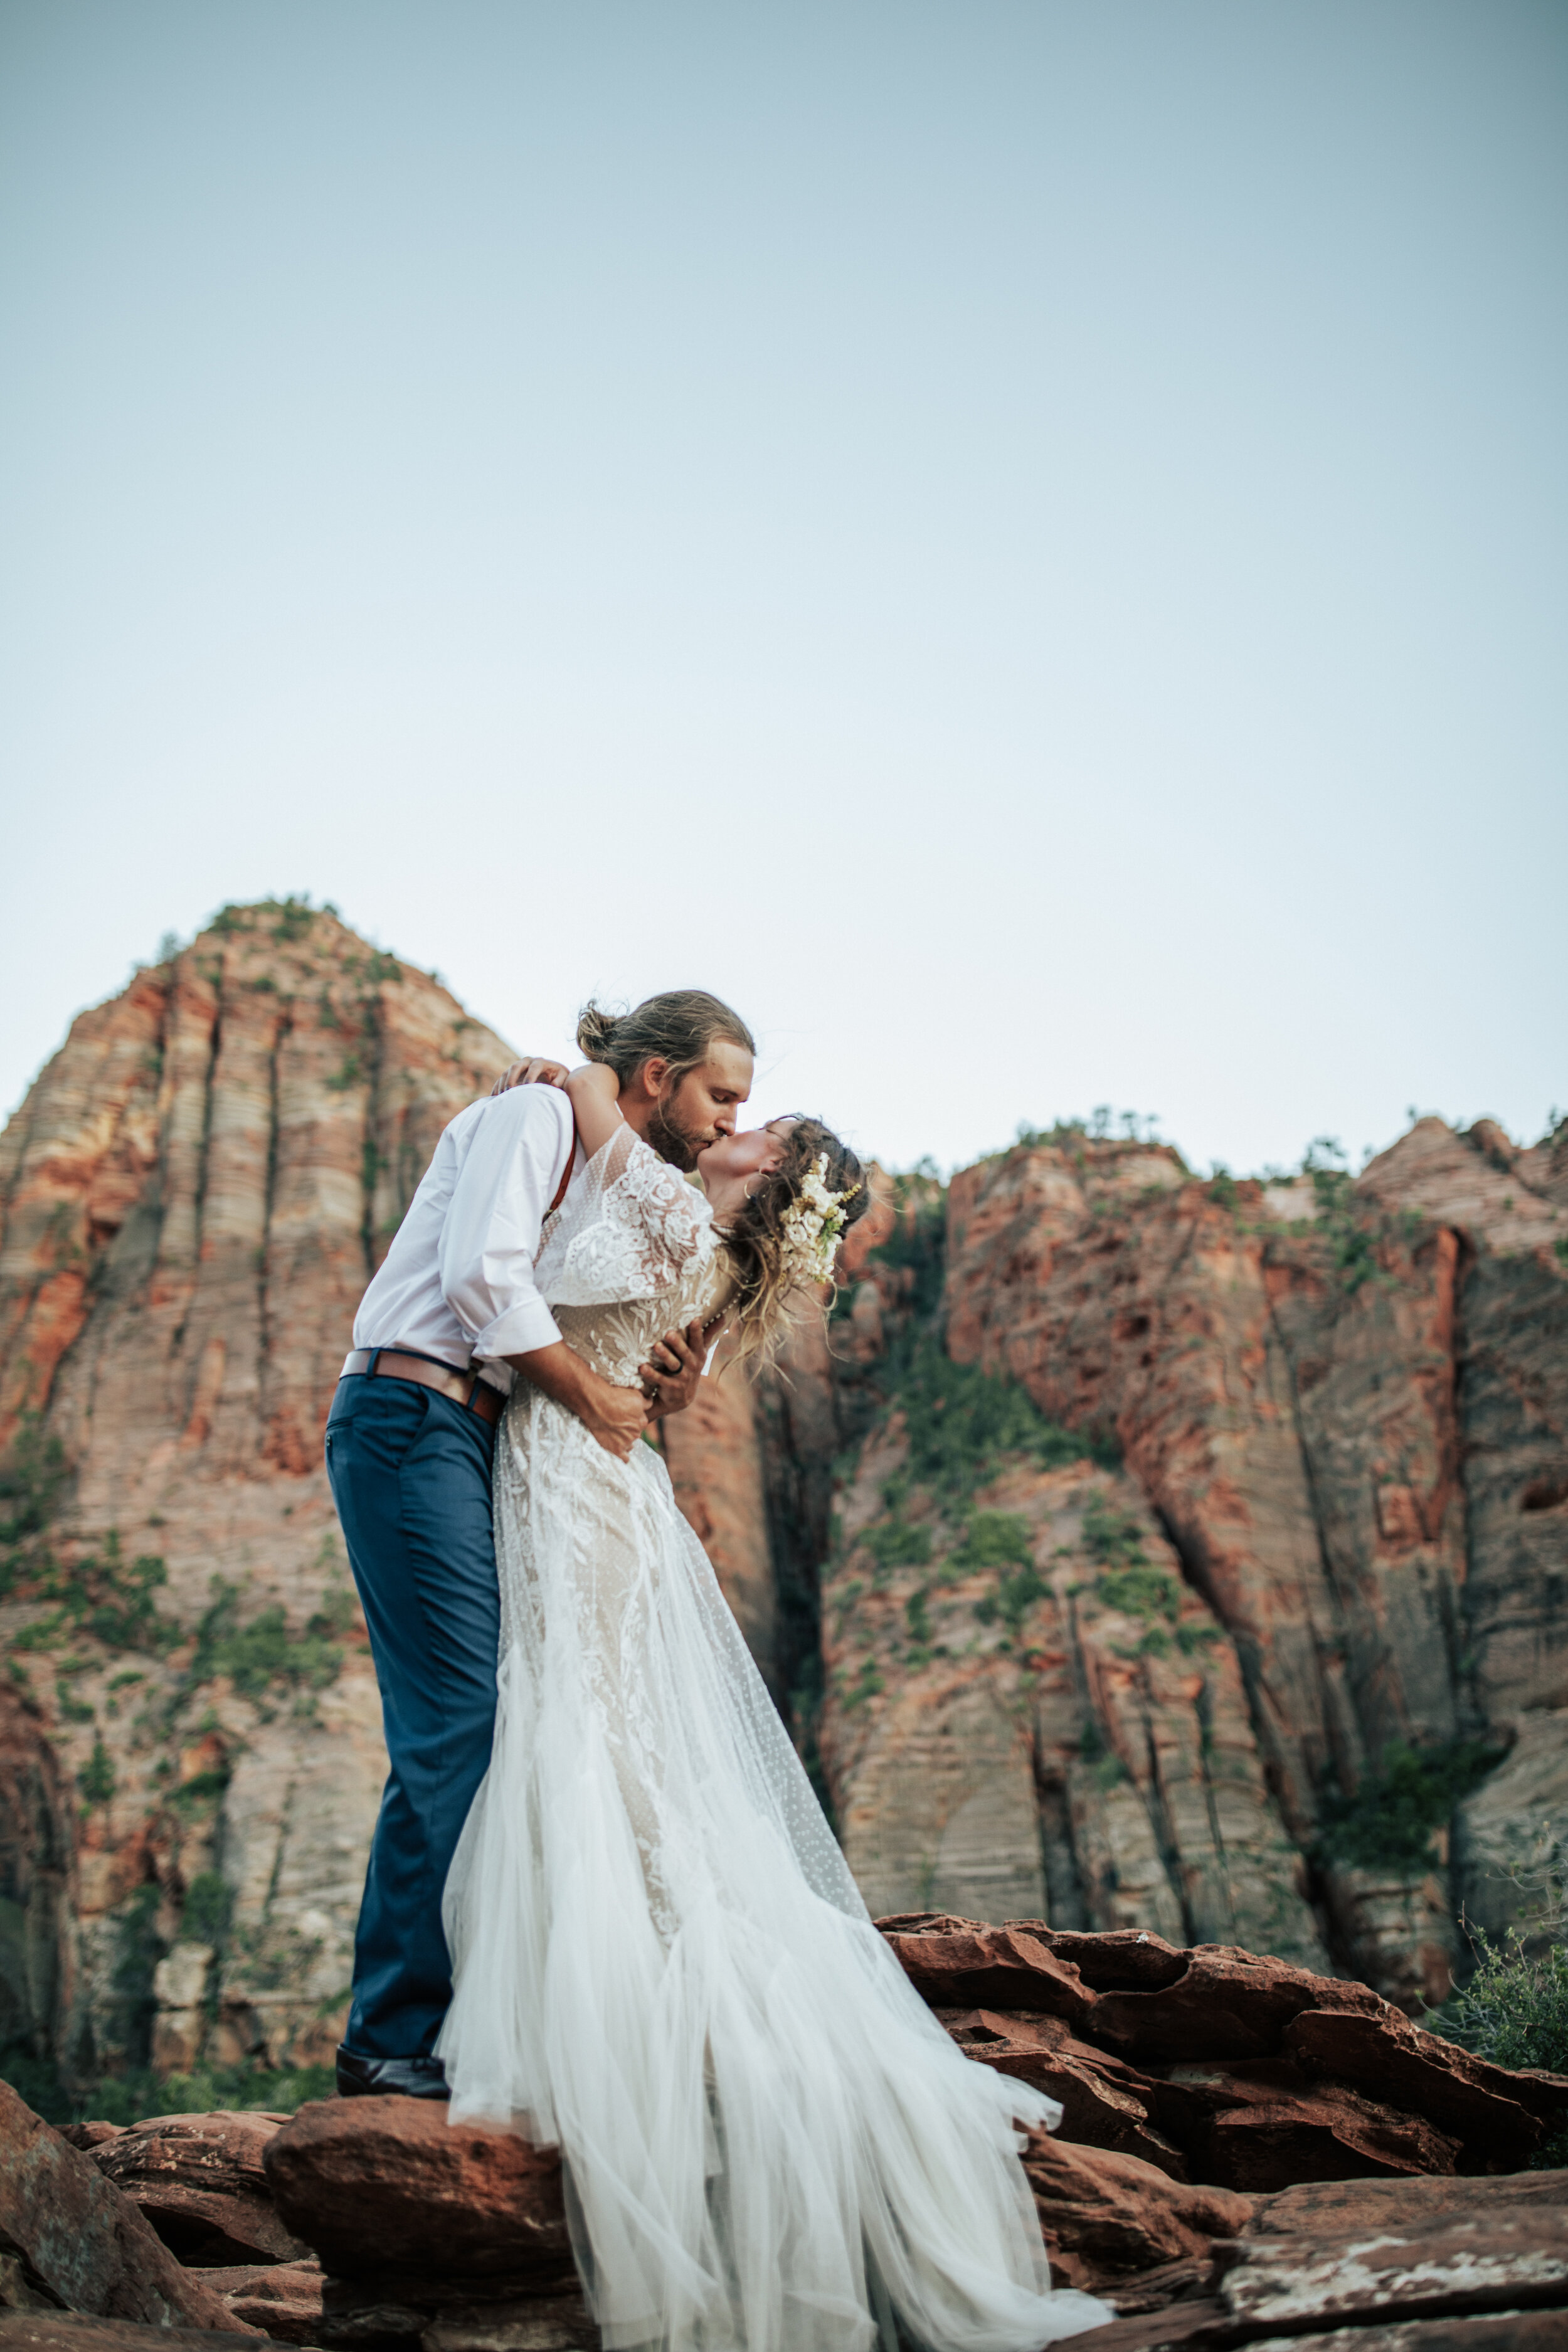  A handsome groom dips his bride as the kiss on the cliffs of Zion National Park, Utah in elopement styled photo shoot by professional wedding photographer Emily Jenkins Photography. Wedding picture inspiration ideas and goals outdoor photo shoot ins